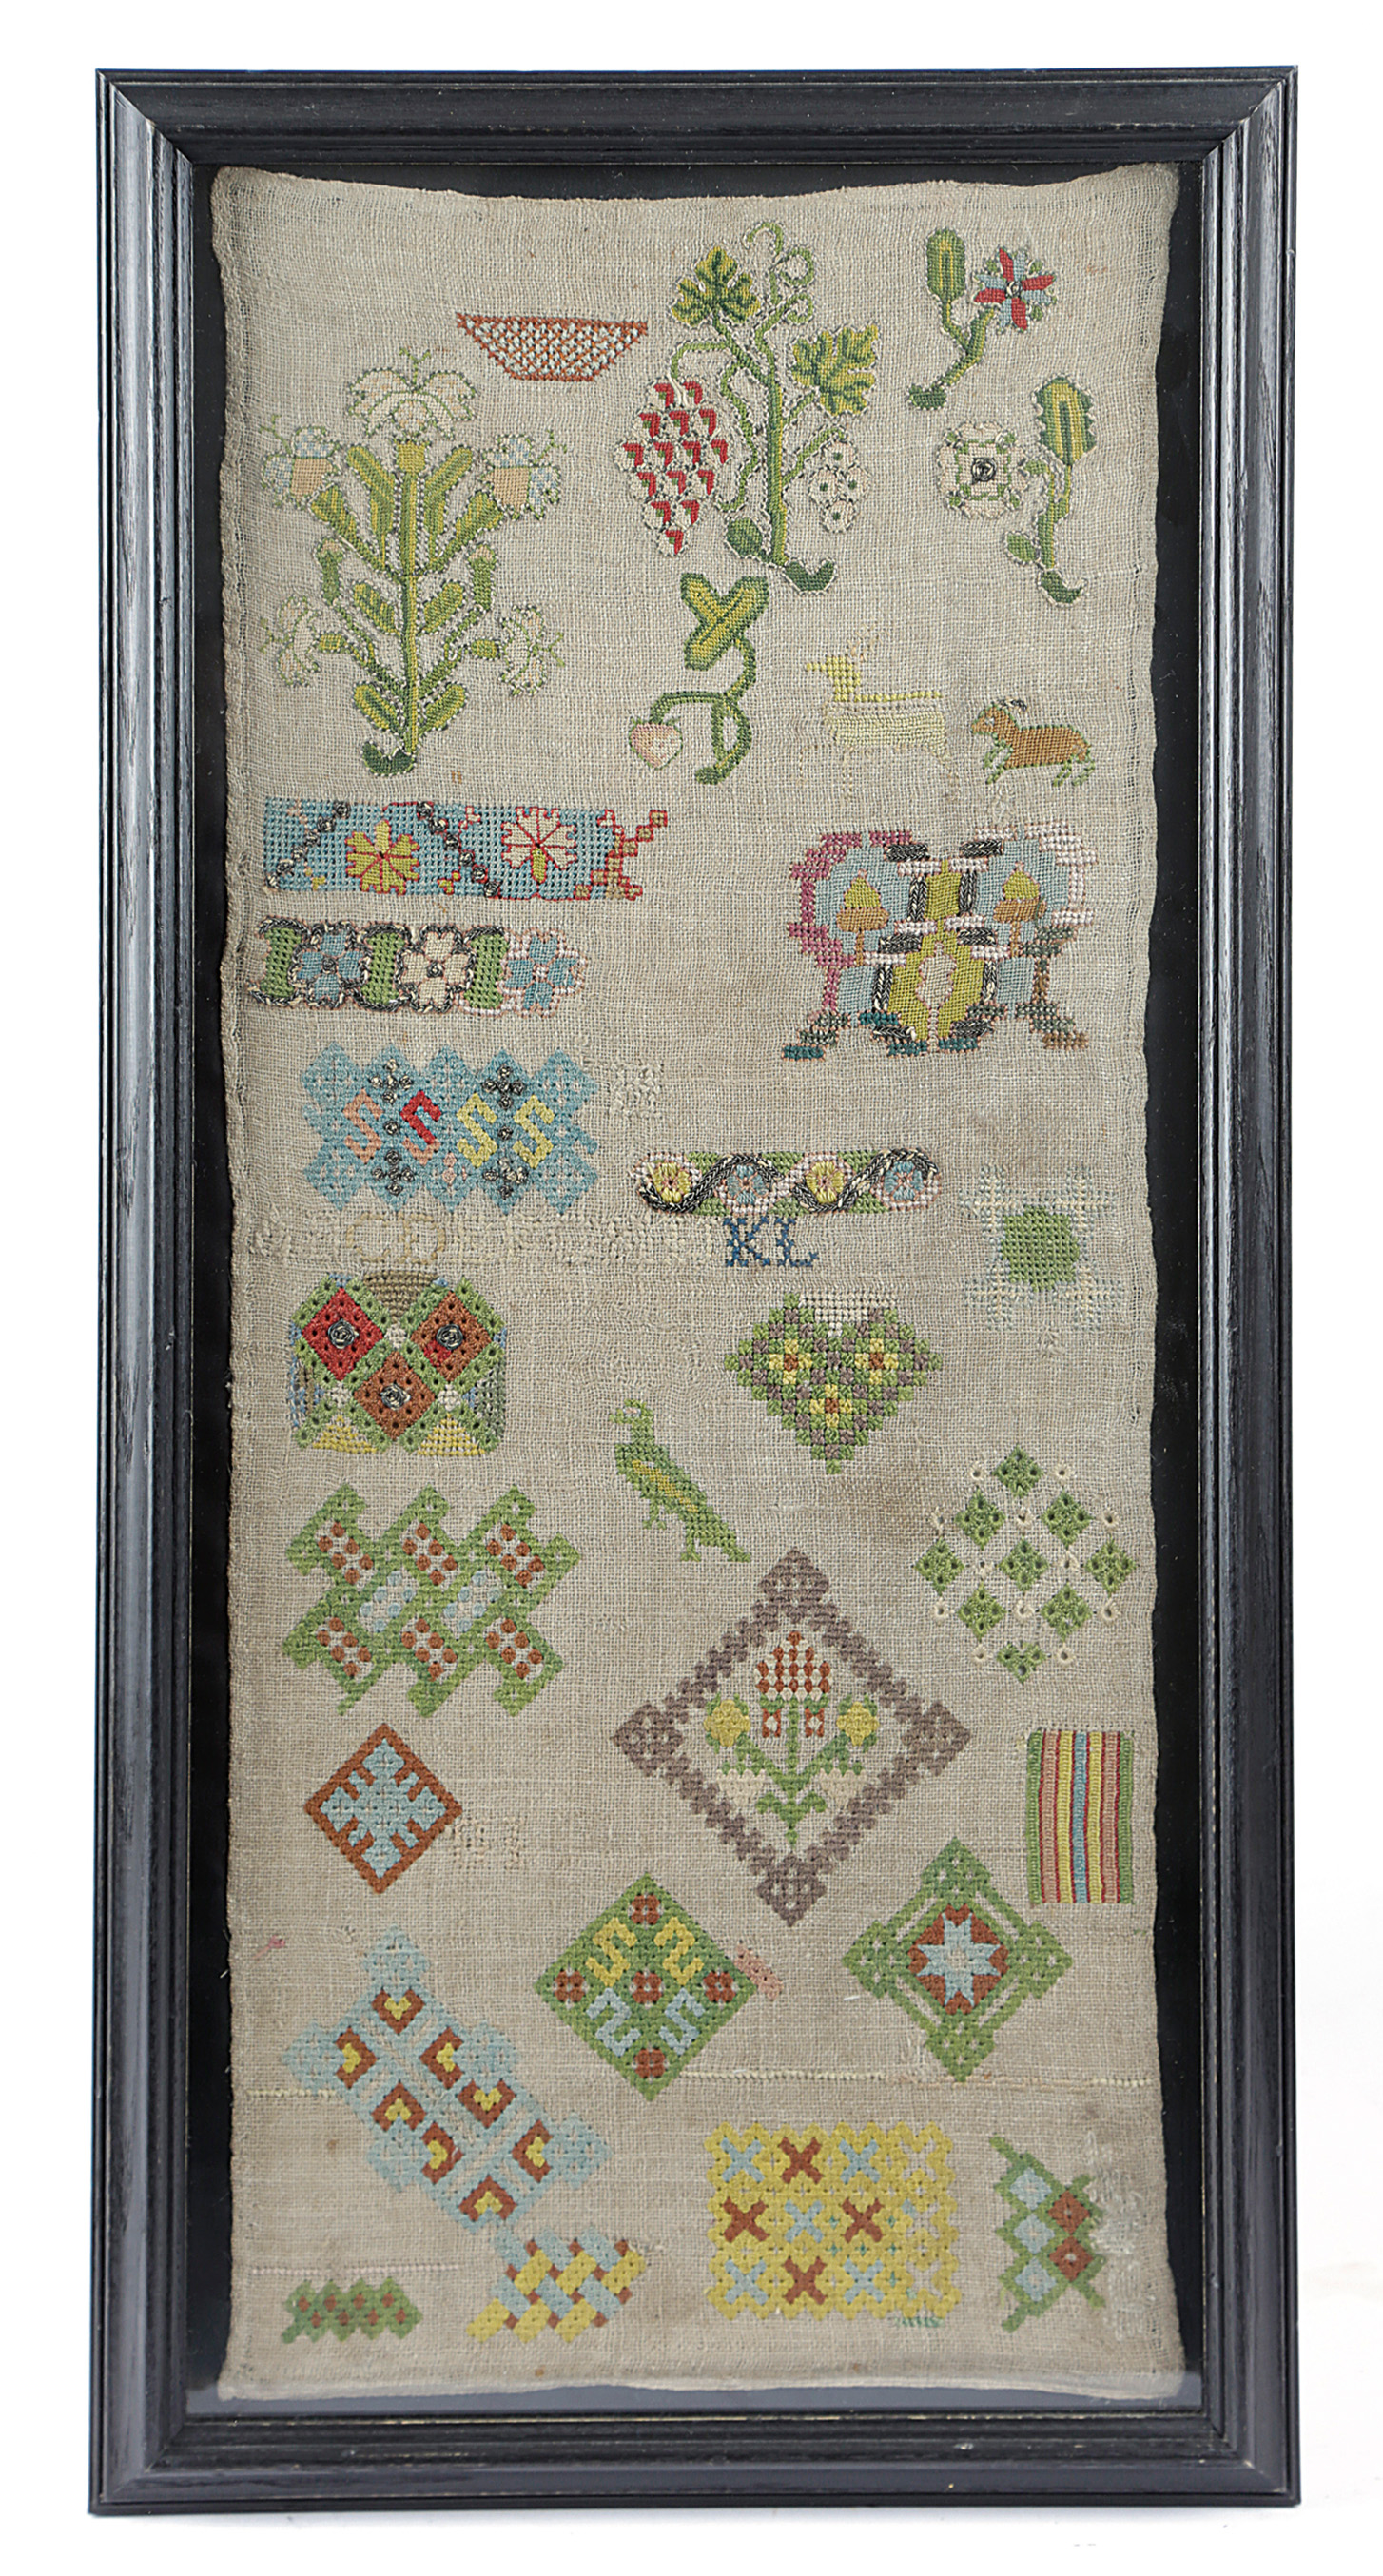 A RARE NEEDLEWORK SPOT SAMPLER MID-17TH CENTURY AND LATER worked with polychrome silk floss on an